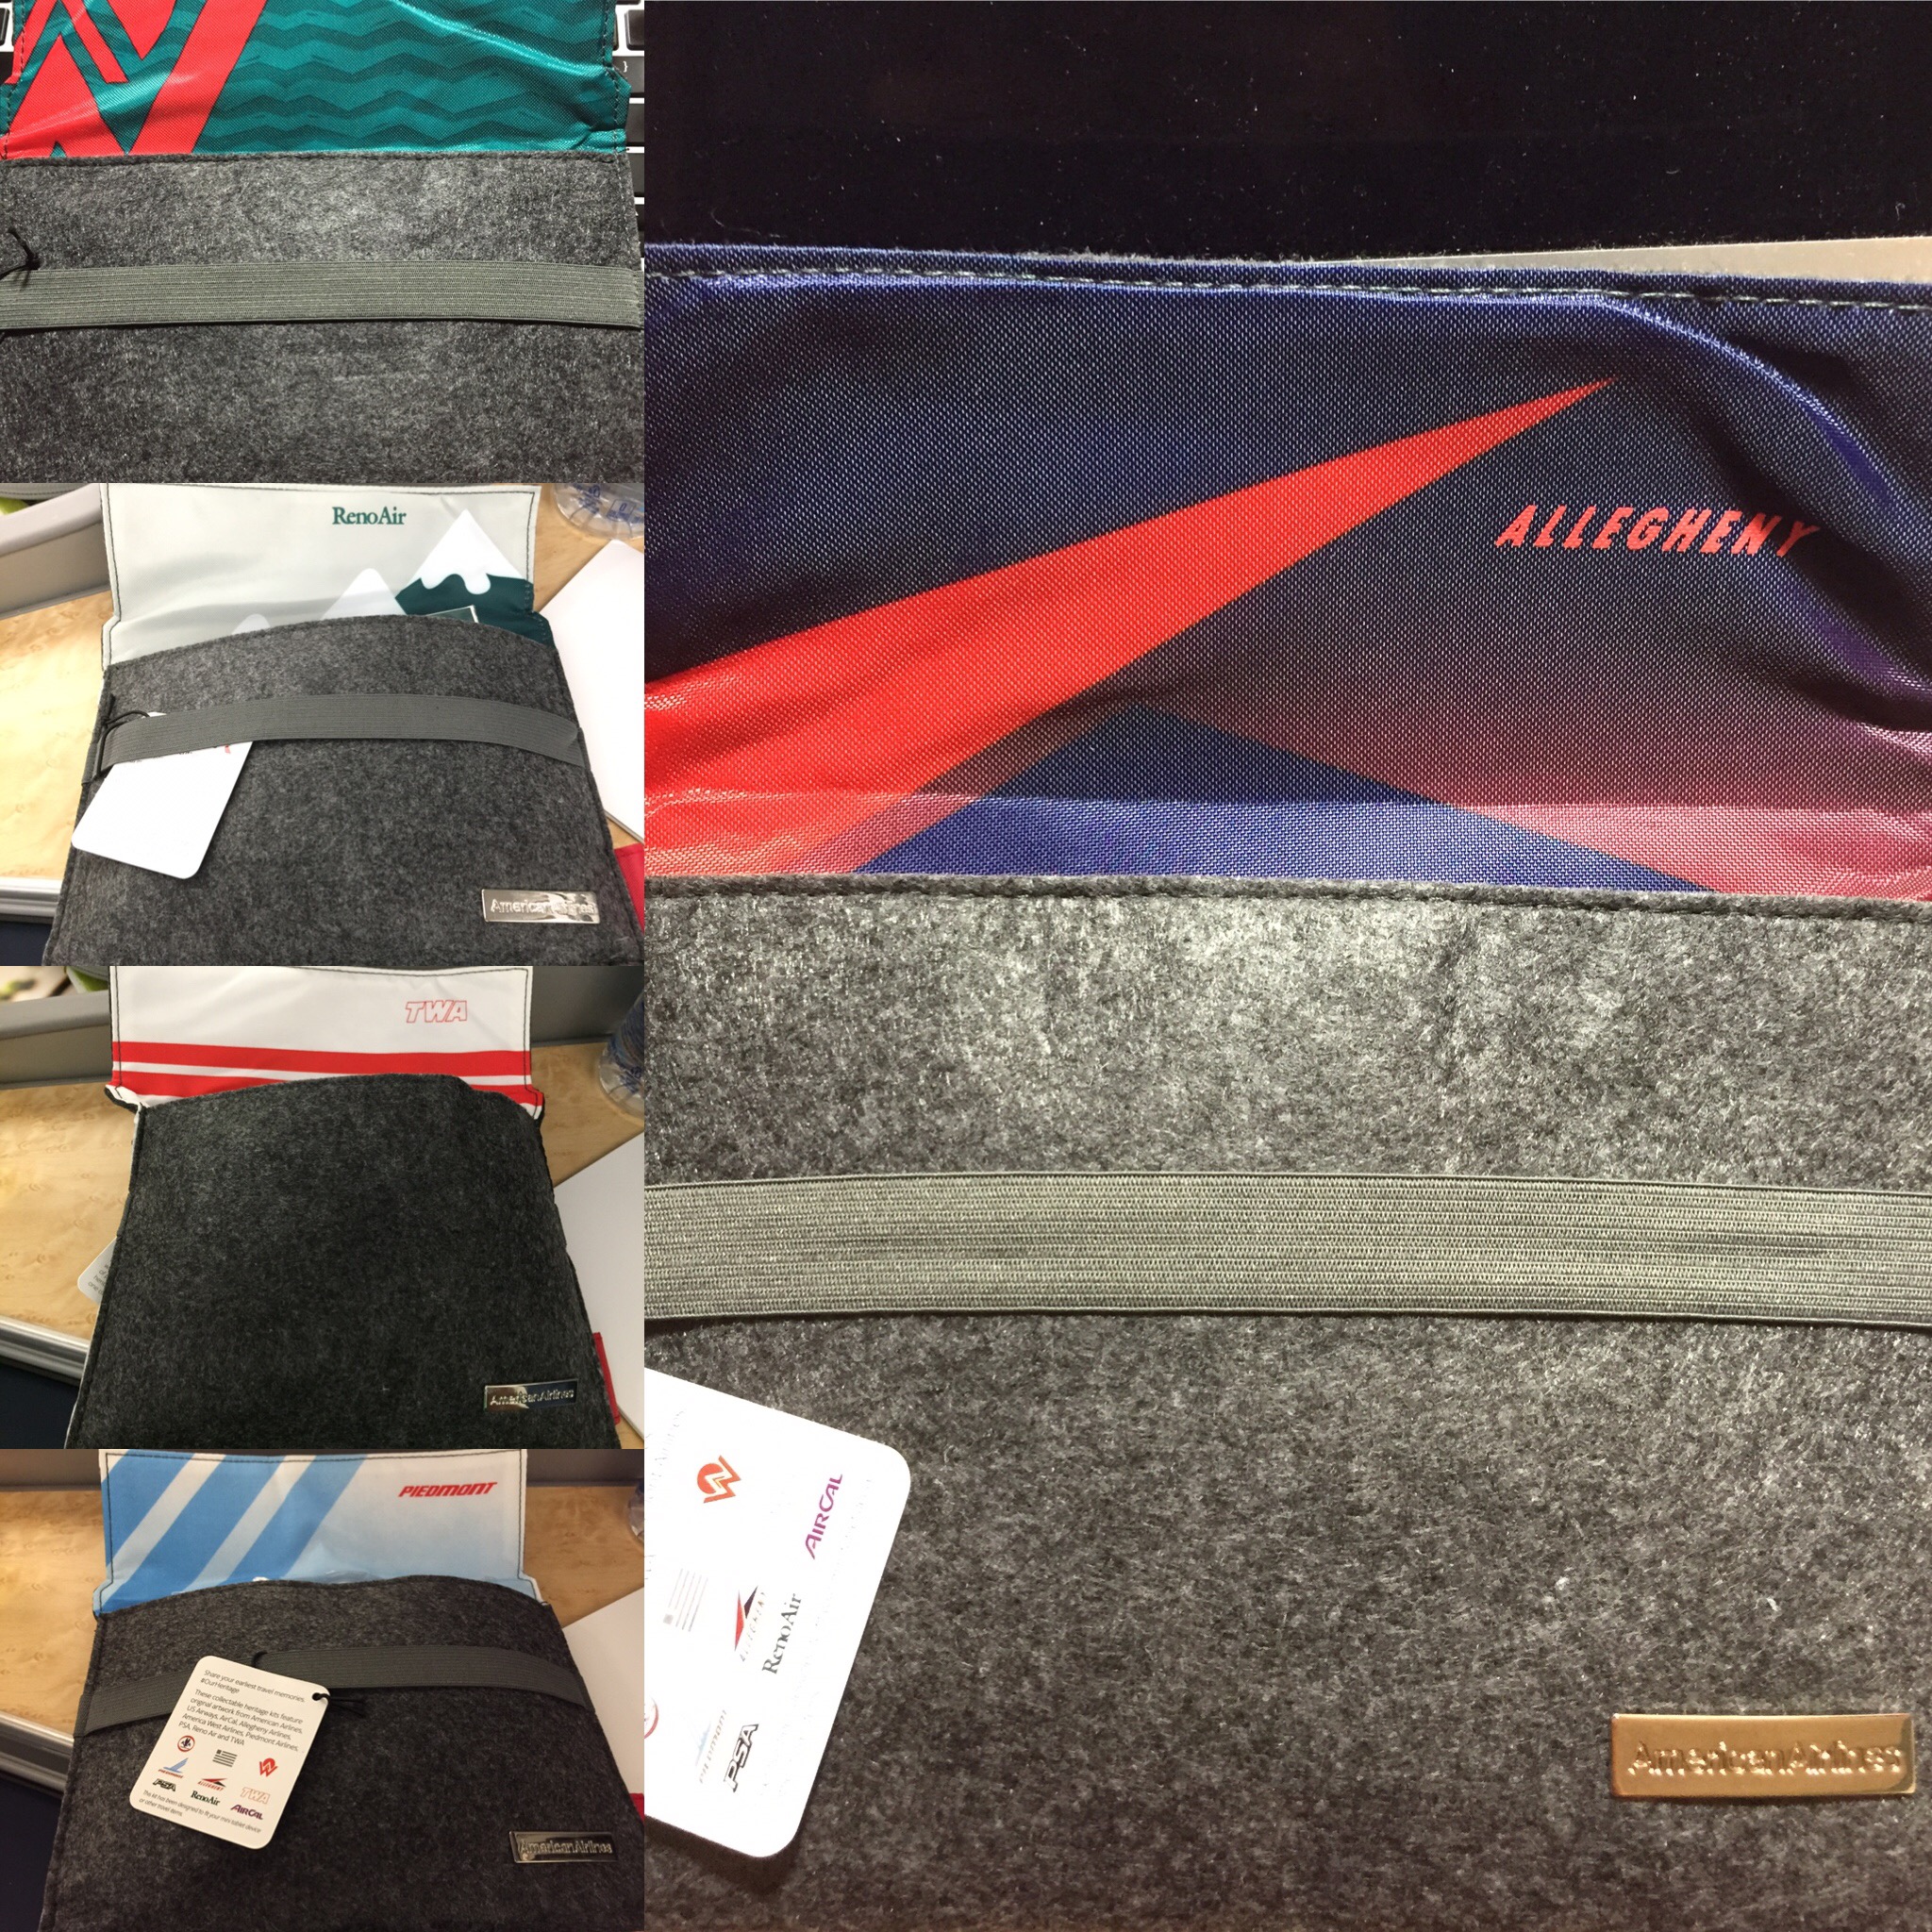 Looks Like The Last Of The Vintage American Airlines Amenity Kits Are Out!